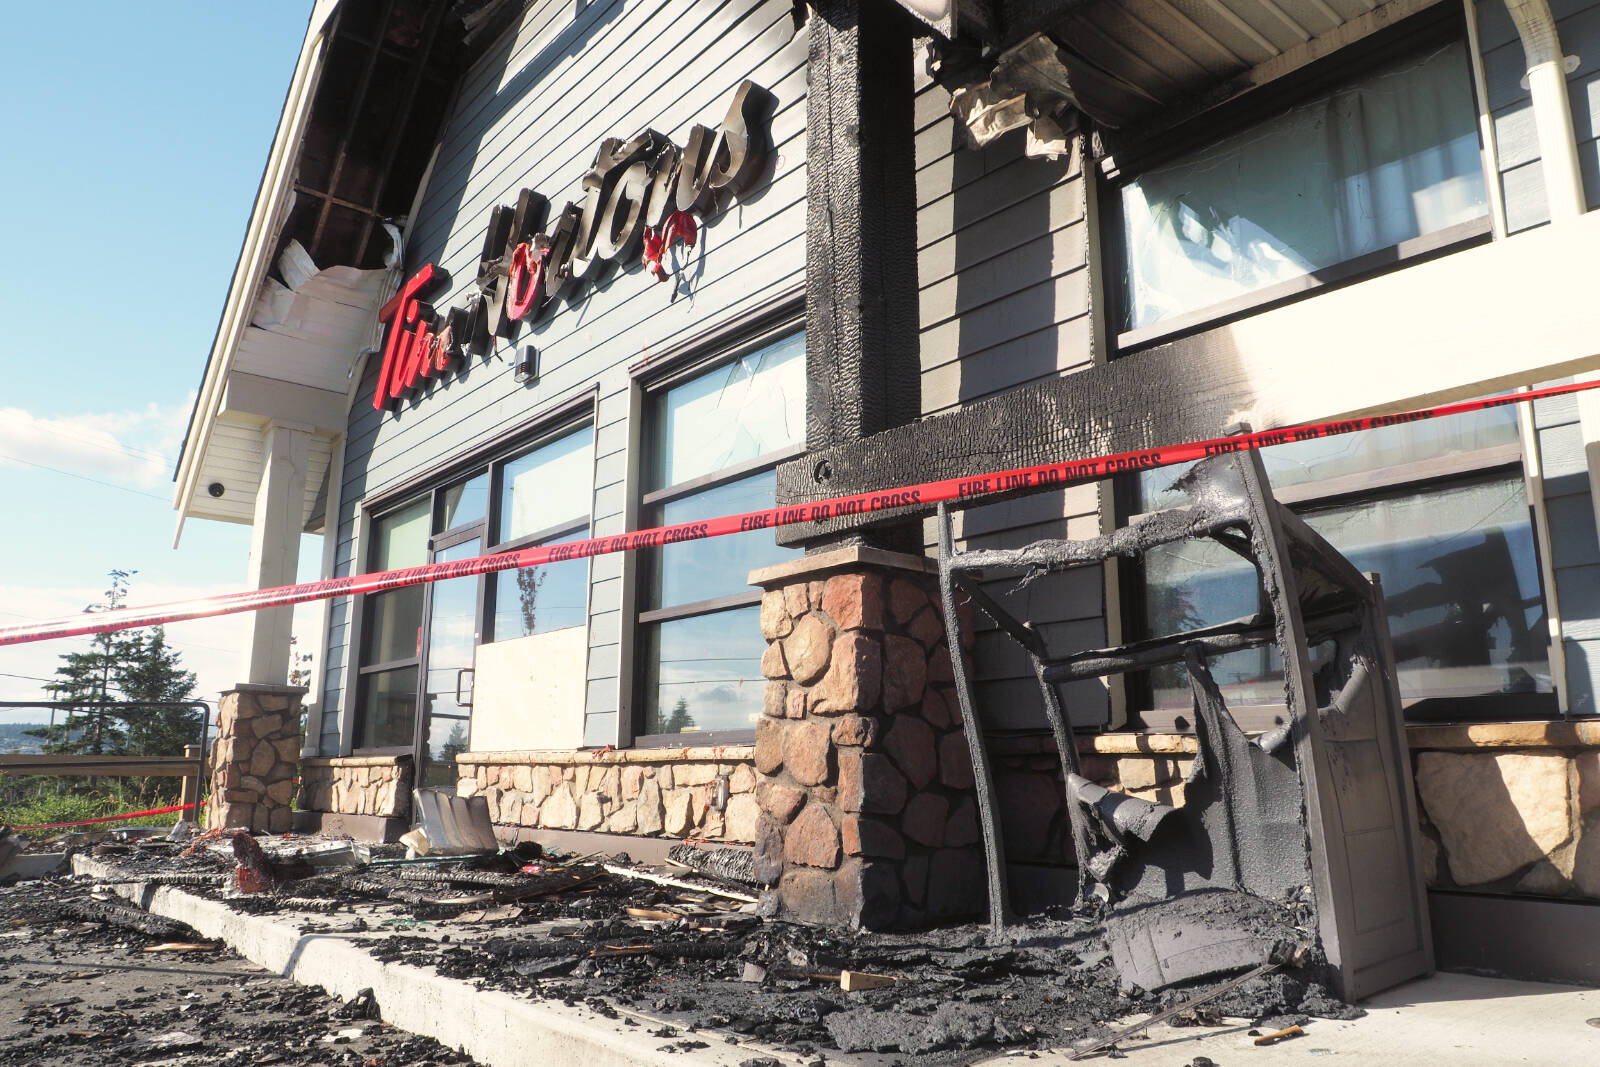 The Tim Hortons restaurant on Northfield Road in Nanaimo suffered damage in an early-morning fire Tuesday, Aug. 2. The fire is being investigated as an arson. (Chris Bush/News Bulletin)